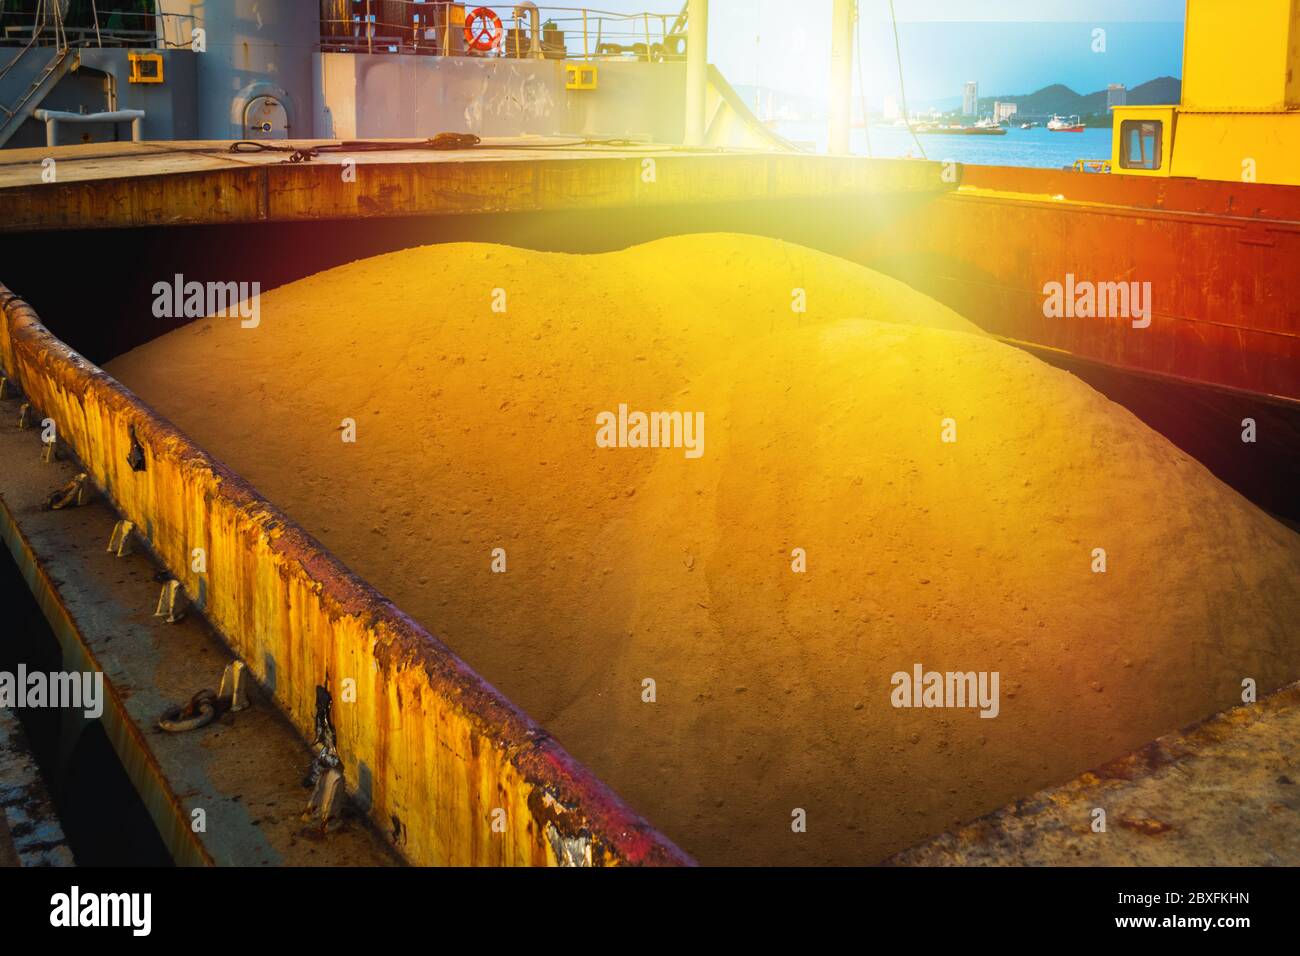 Raw sugar bulk inside large vessel after completed load ready for draft survey. Sugar bulk products transport and handling. Agro-industry concept. Stock Photo